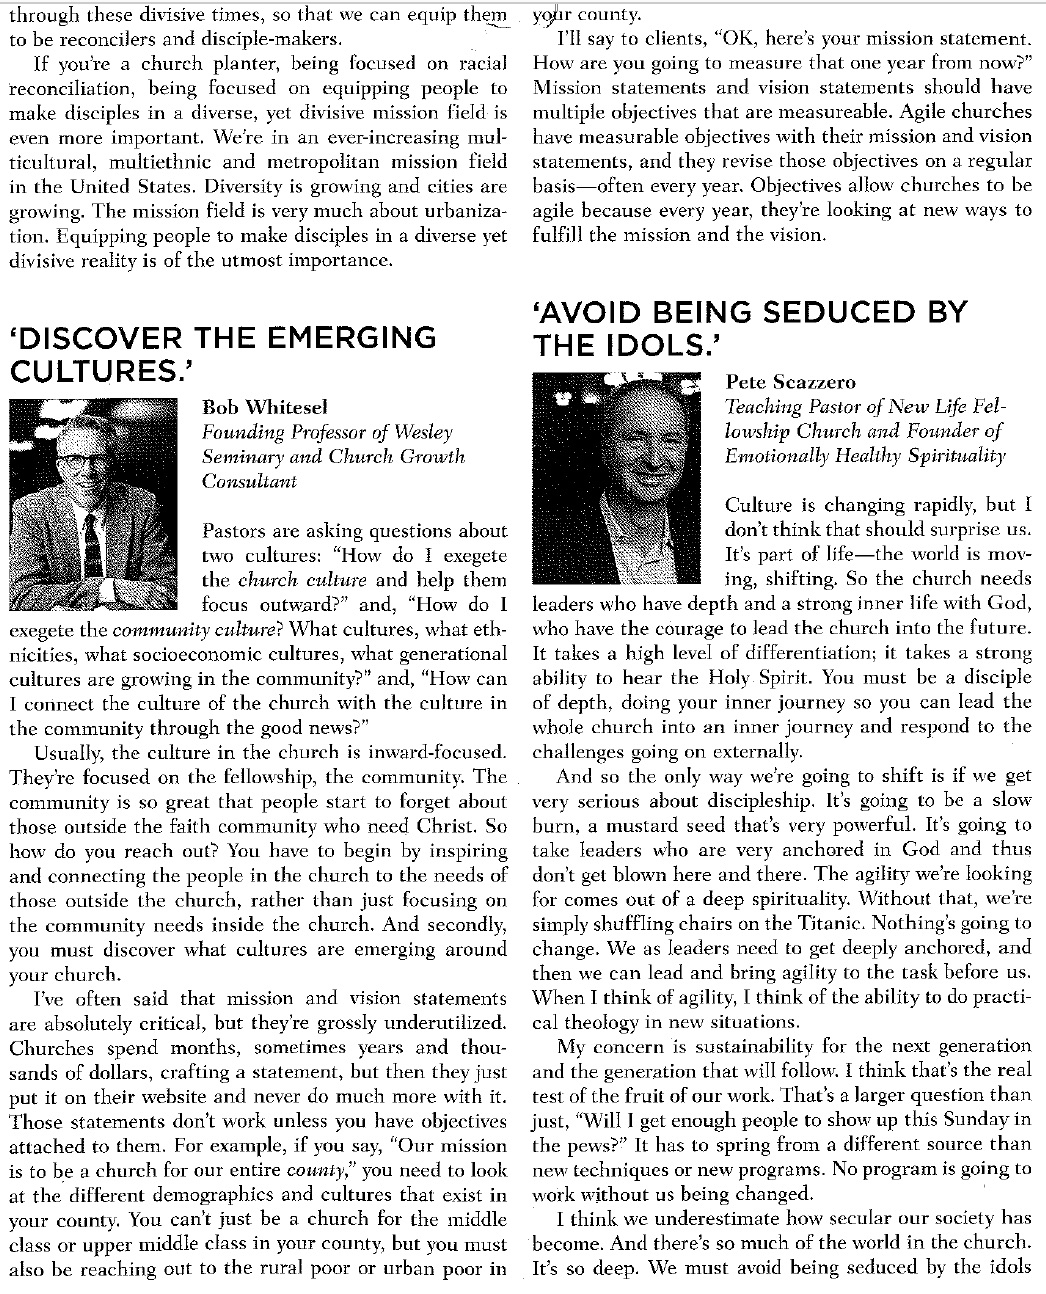 ARTICLE ©Whitesel - Outreach Mag. Excerpt Discover Emerging Cultures Jan. 2017.jpg